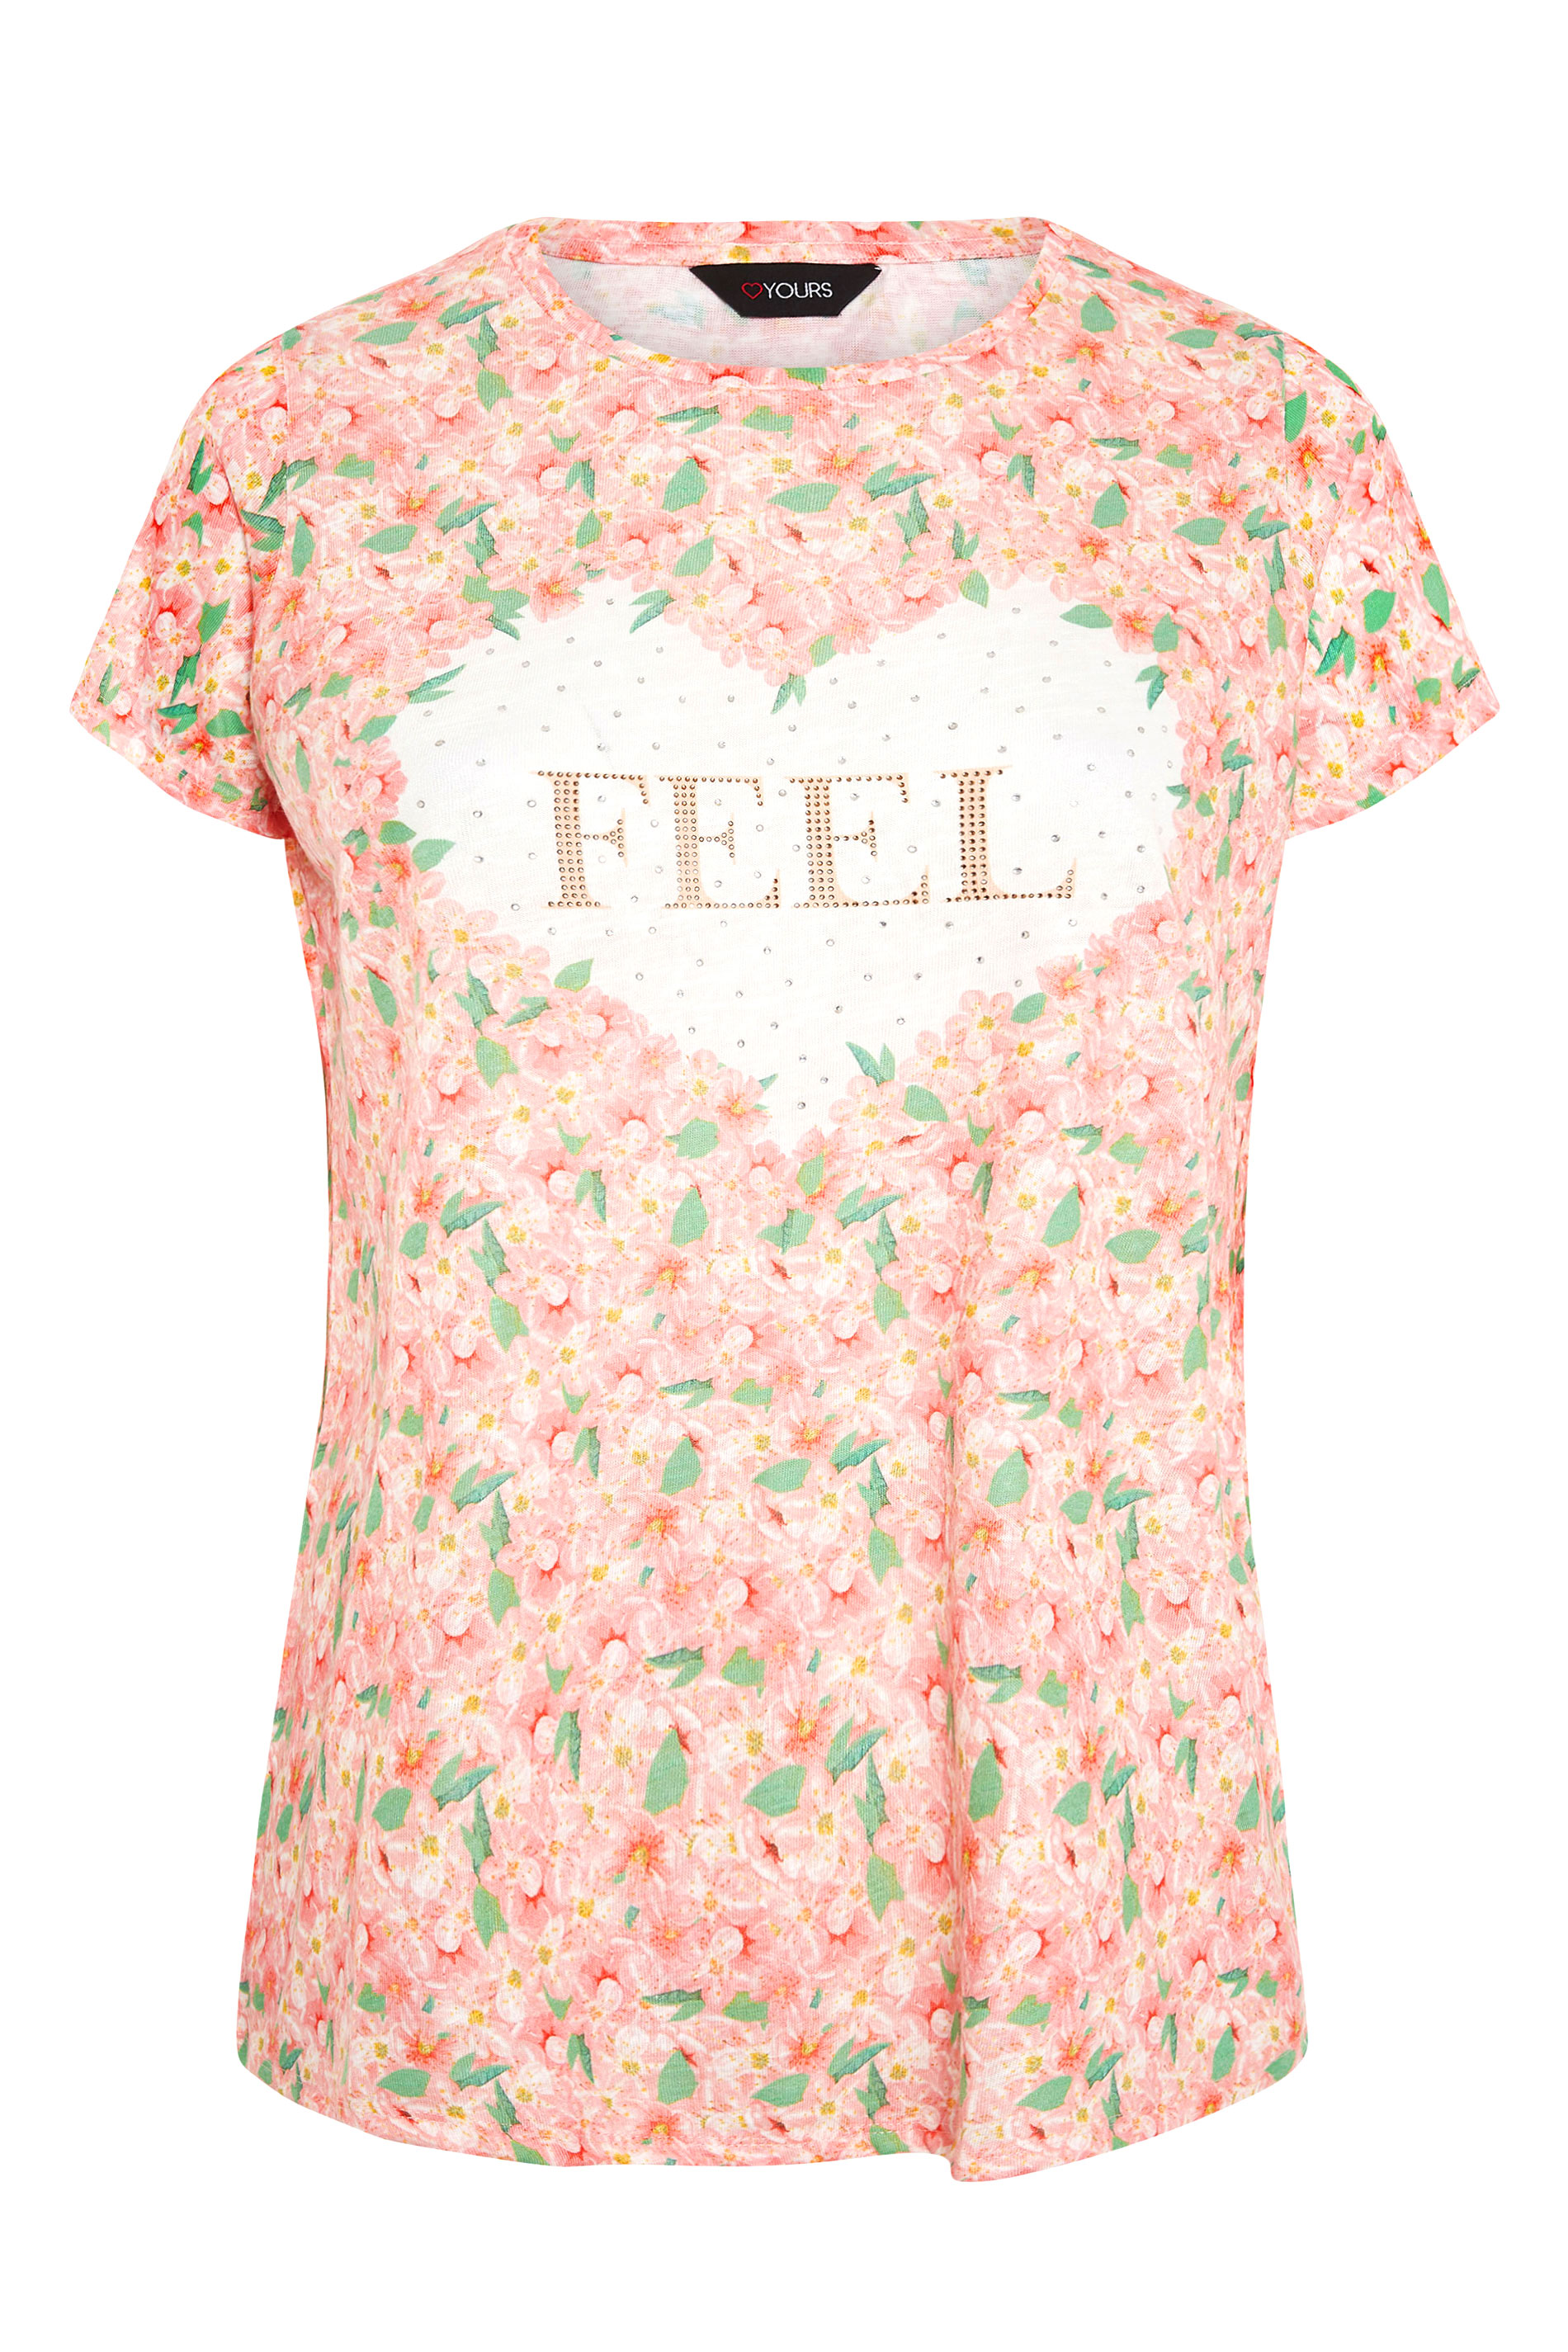 Grande taille  Tops Grande taille  T-Shirts | T-Shirt Rose Floral Coeur 'Feel' - XB25928